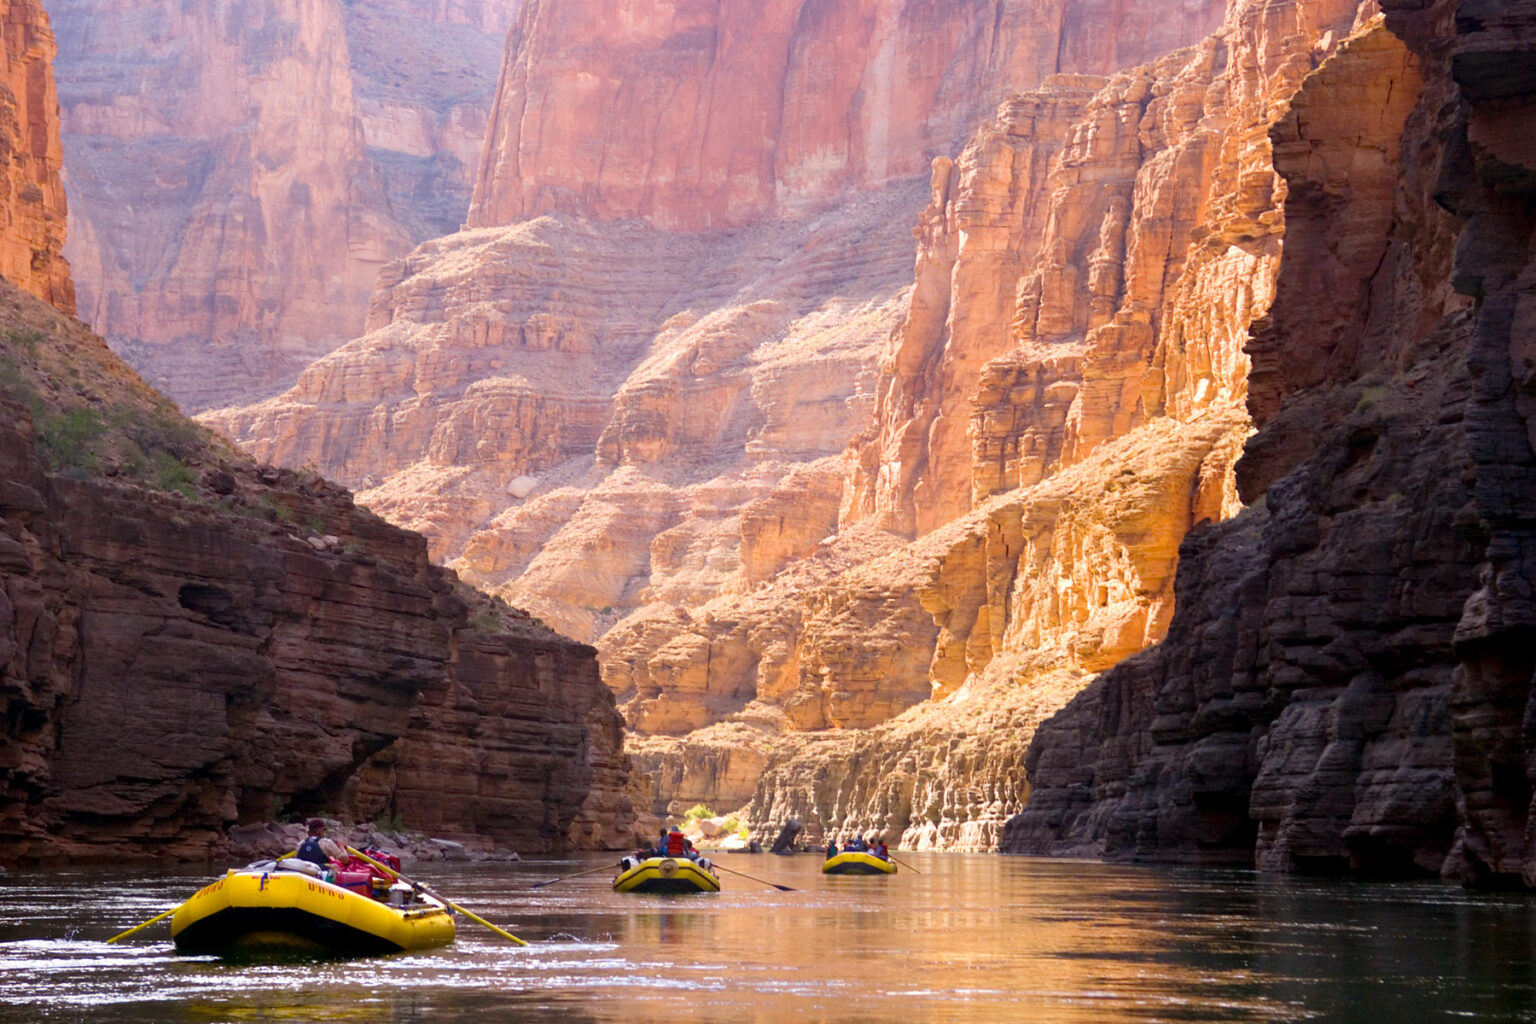 OARS rafts follow in a line through brightly lit canyon at heart of Grand Canyon